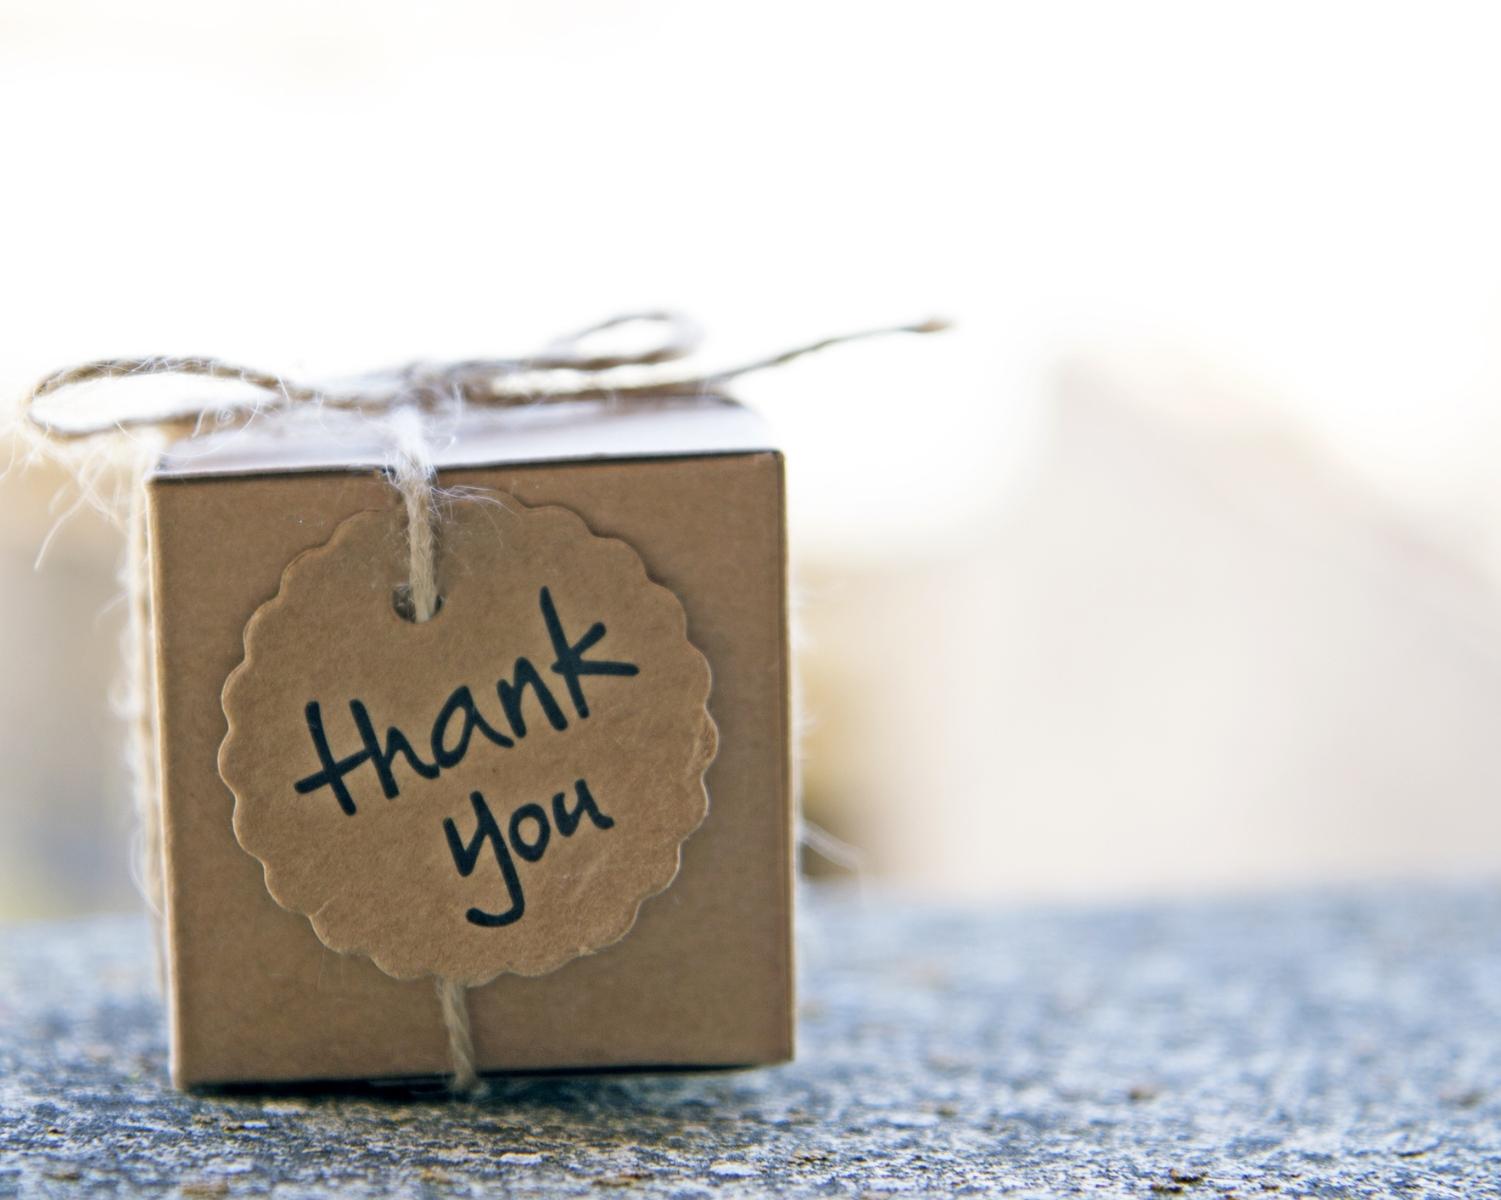 Leave a gift and a thank-you note